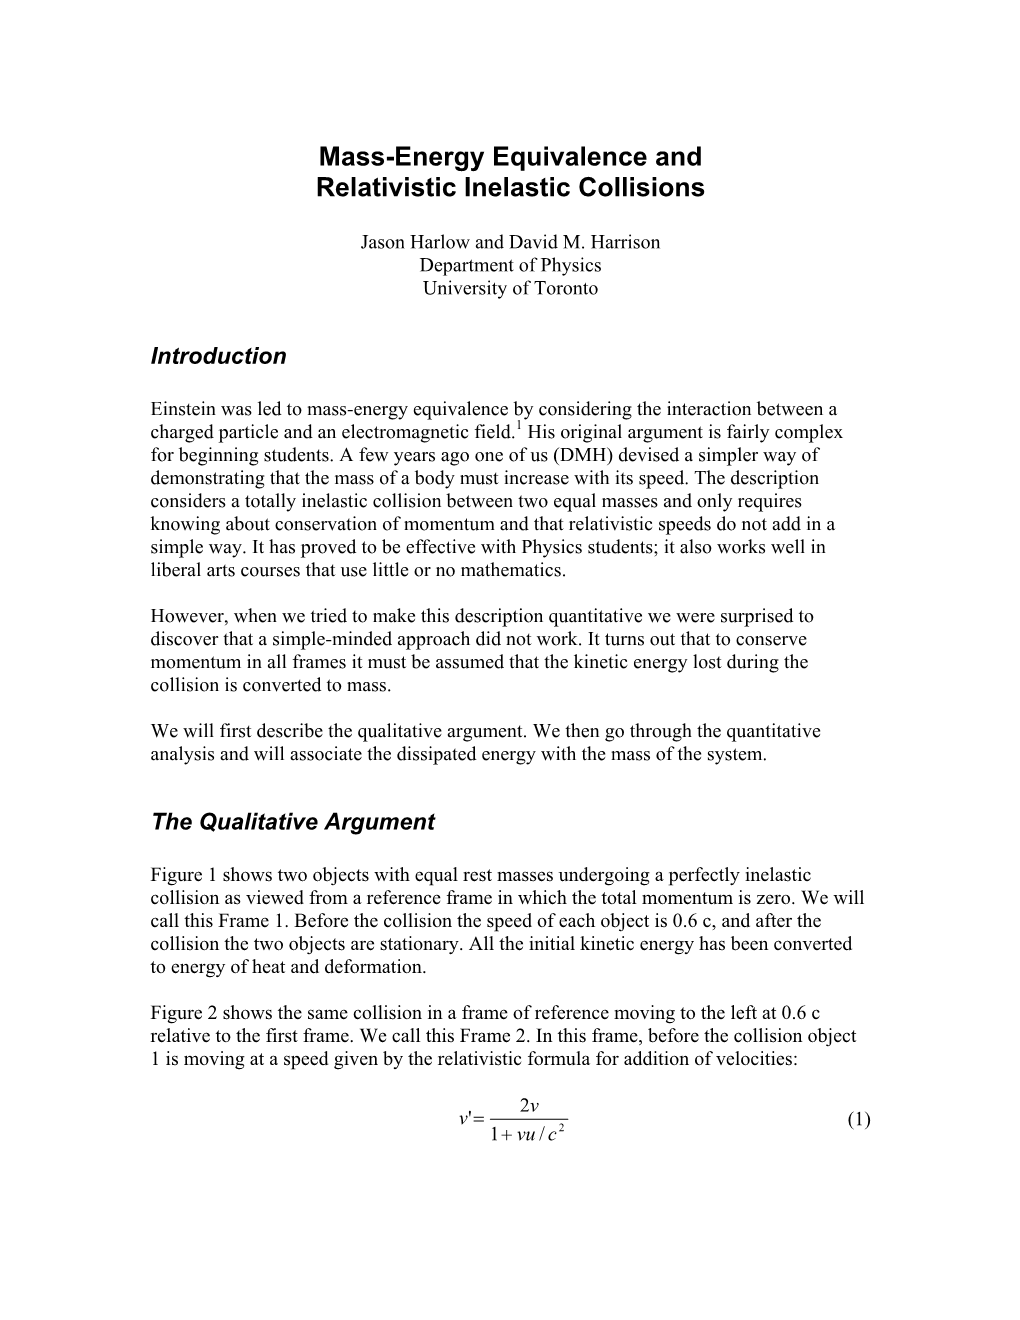 Mass-Energy Equivalence and Relativistic Inelastic Collisions